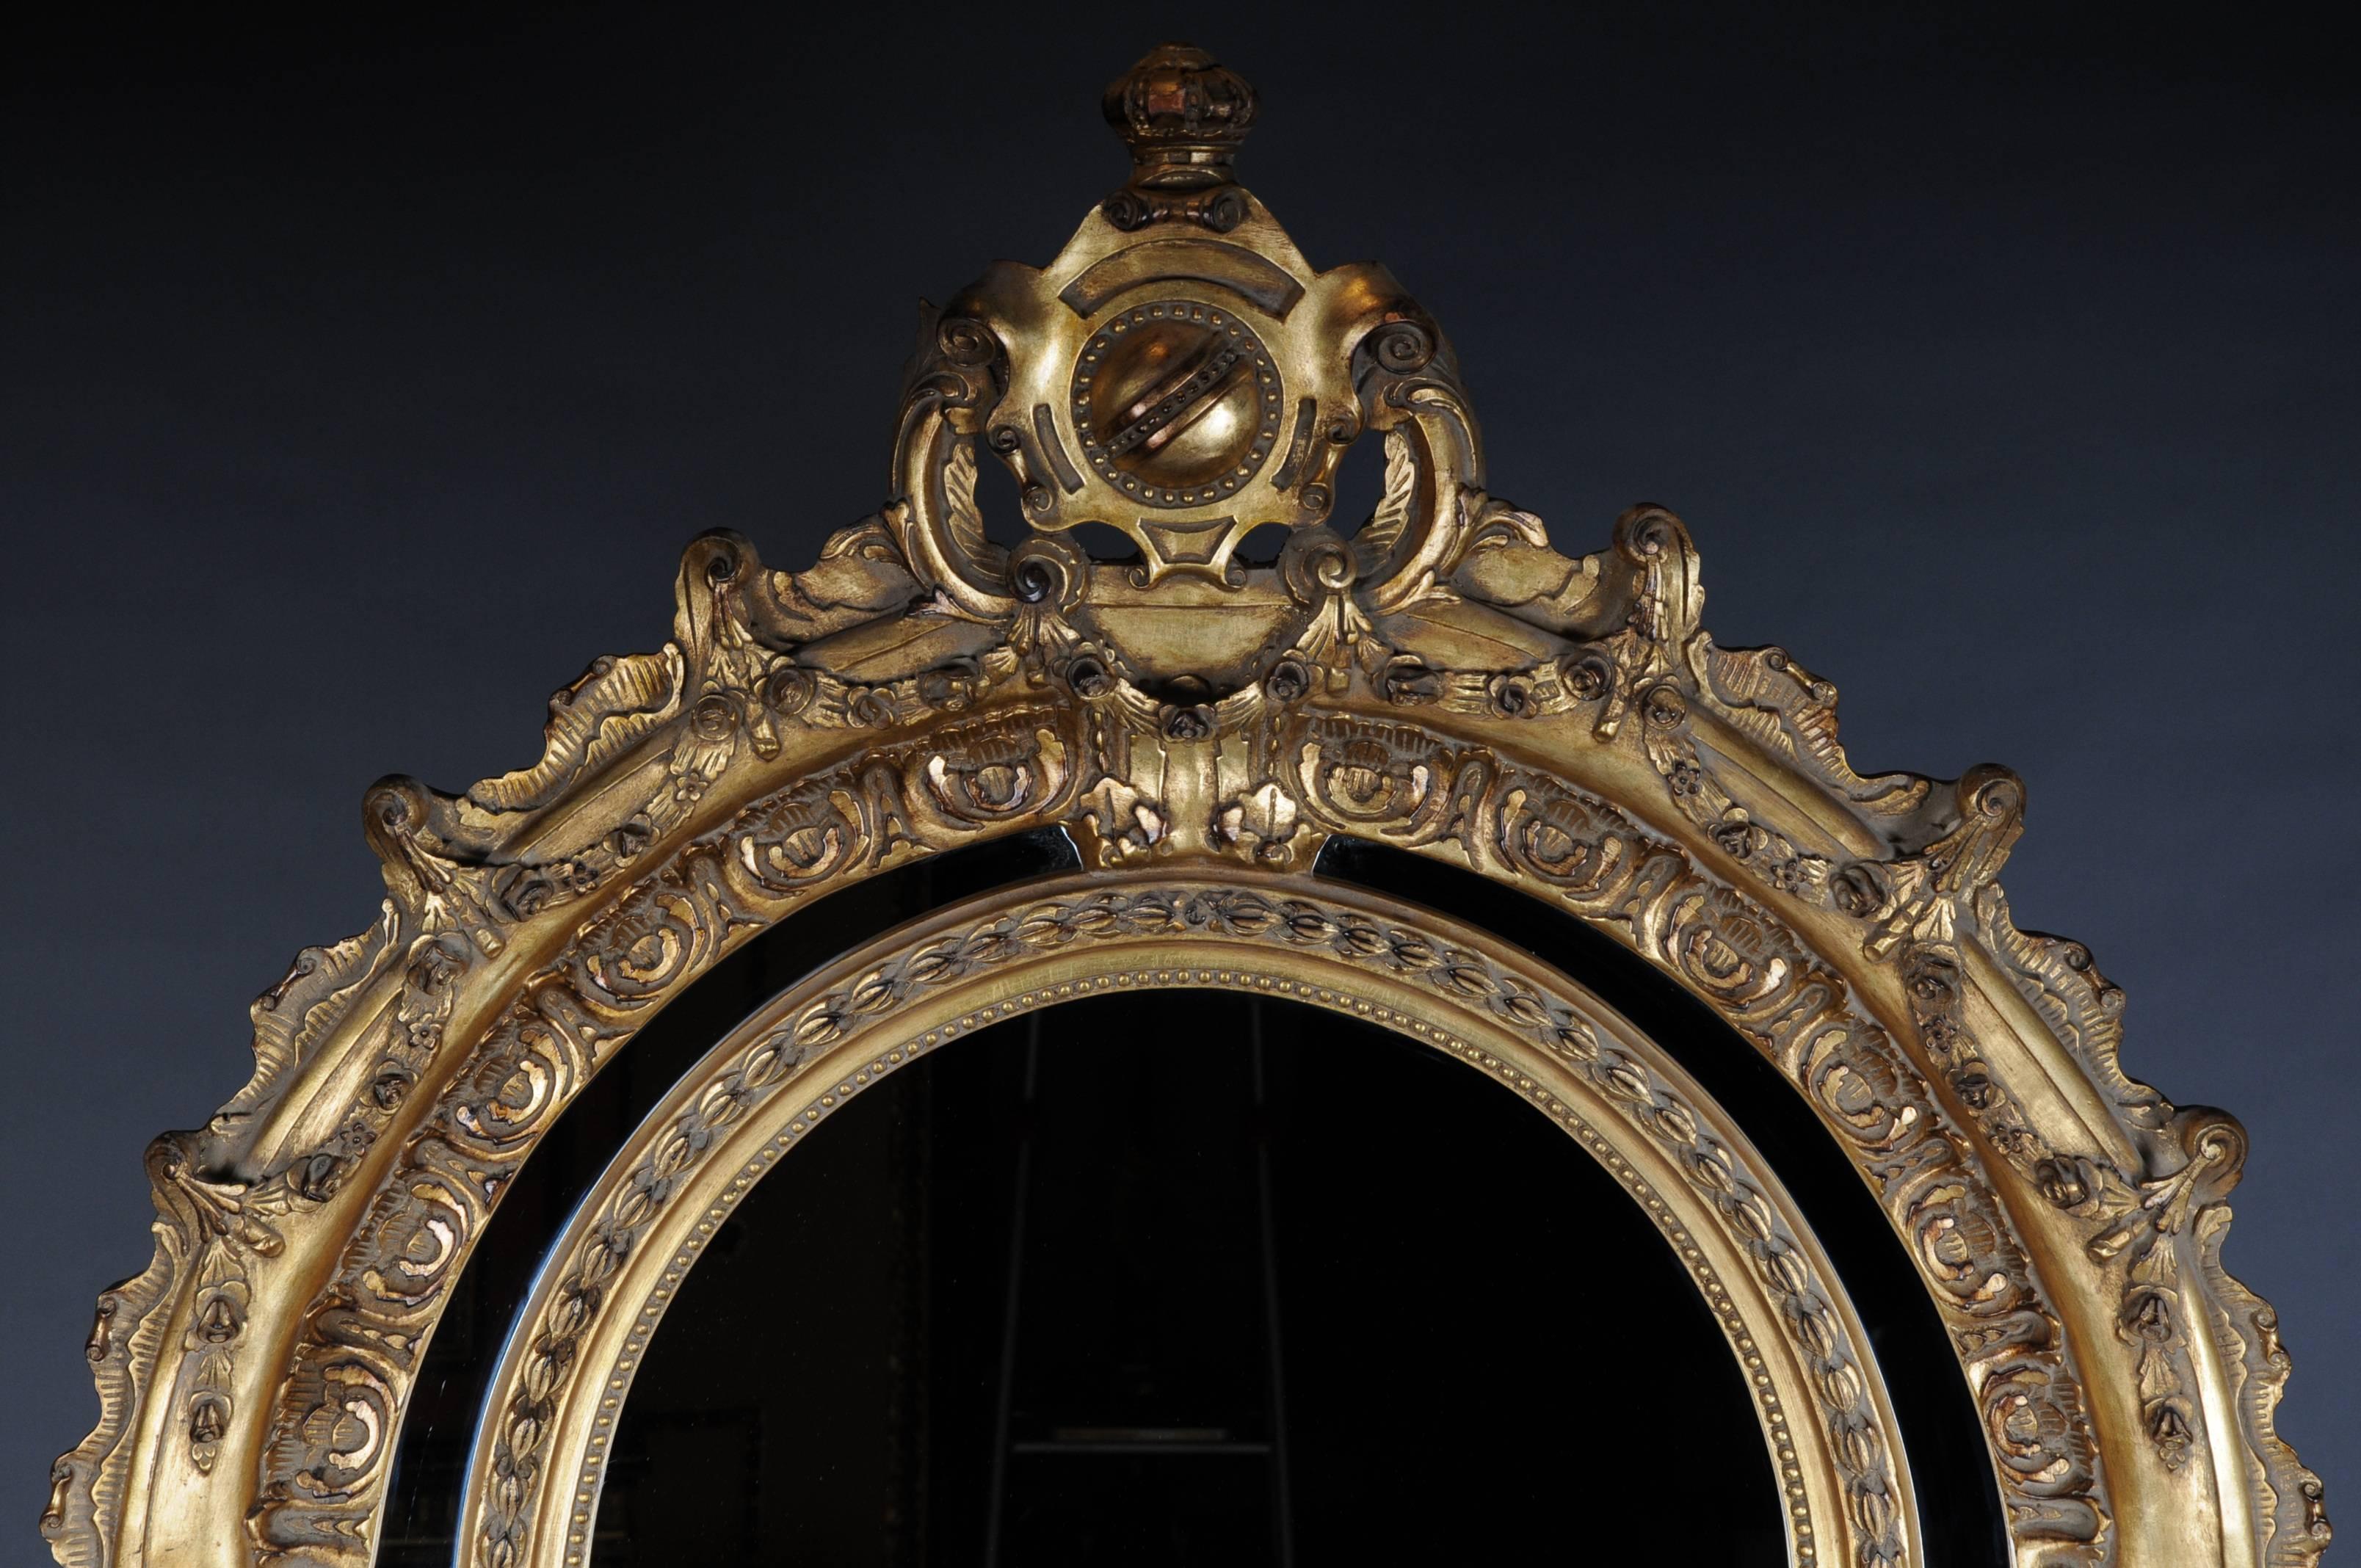 20th Century Gigantic Full-Length Mirror in Louis XVI, Solid beechwood

Solid beechwood, finely carved and gilded. Elaborately carved and strongly curled frame conclusion. 

High crest-shaped mirror frame. Rich gable-like openwork rocaille